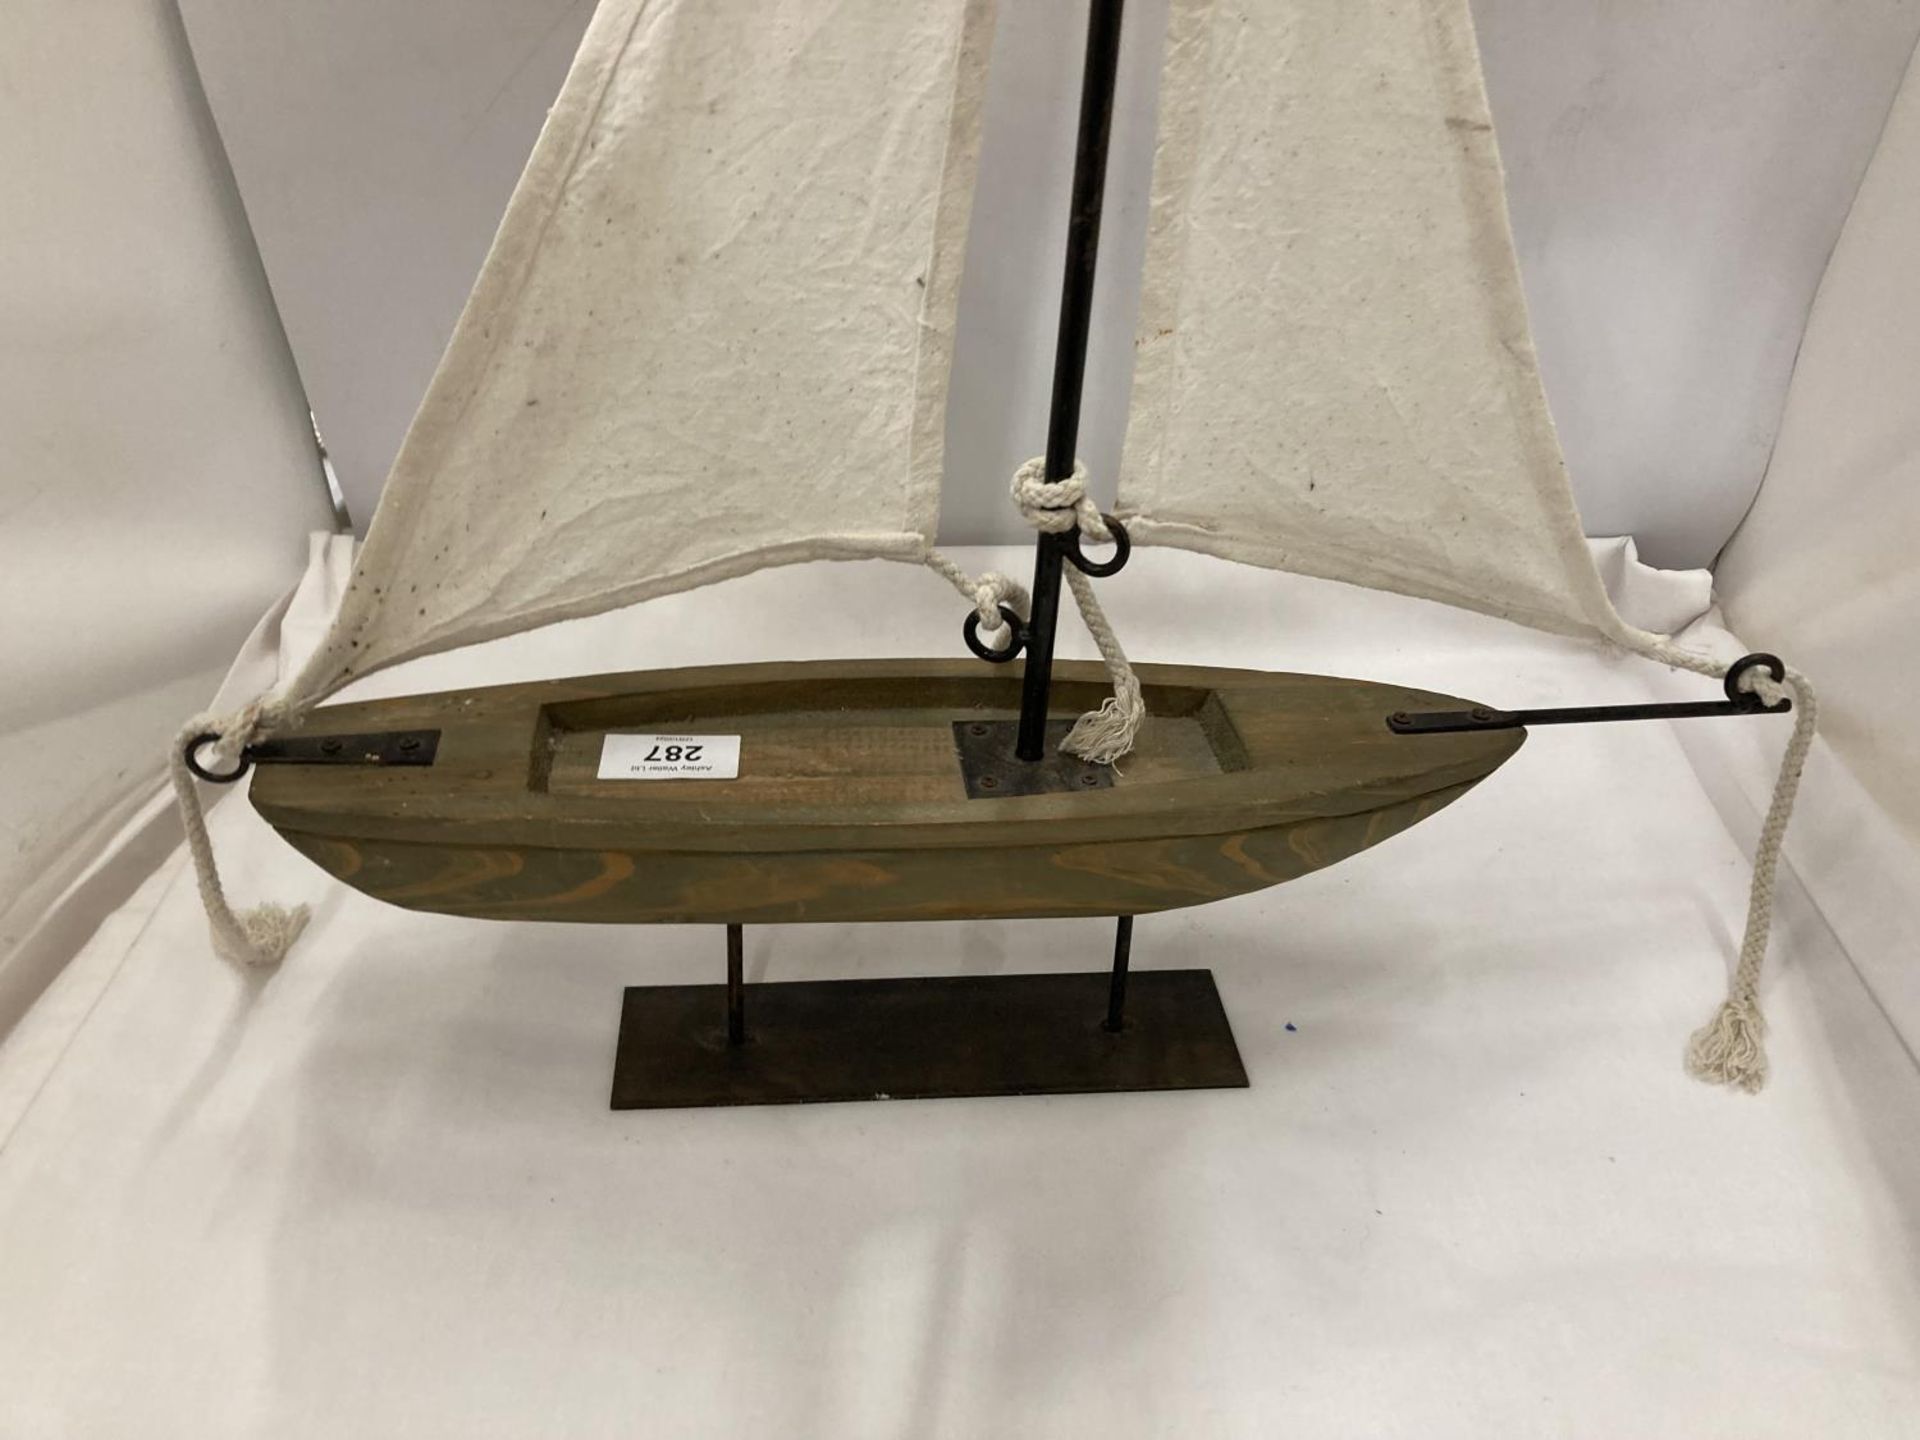 A VINTAGE WOODEN SAILING BOAT ON A DISPLAY PLINT, HEIGHT 56CM, LENGTH 46CM - Image 3 of 3